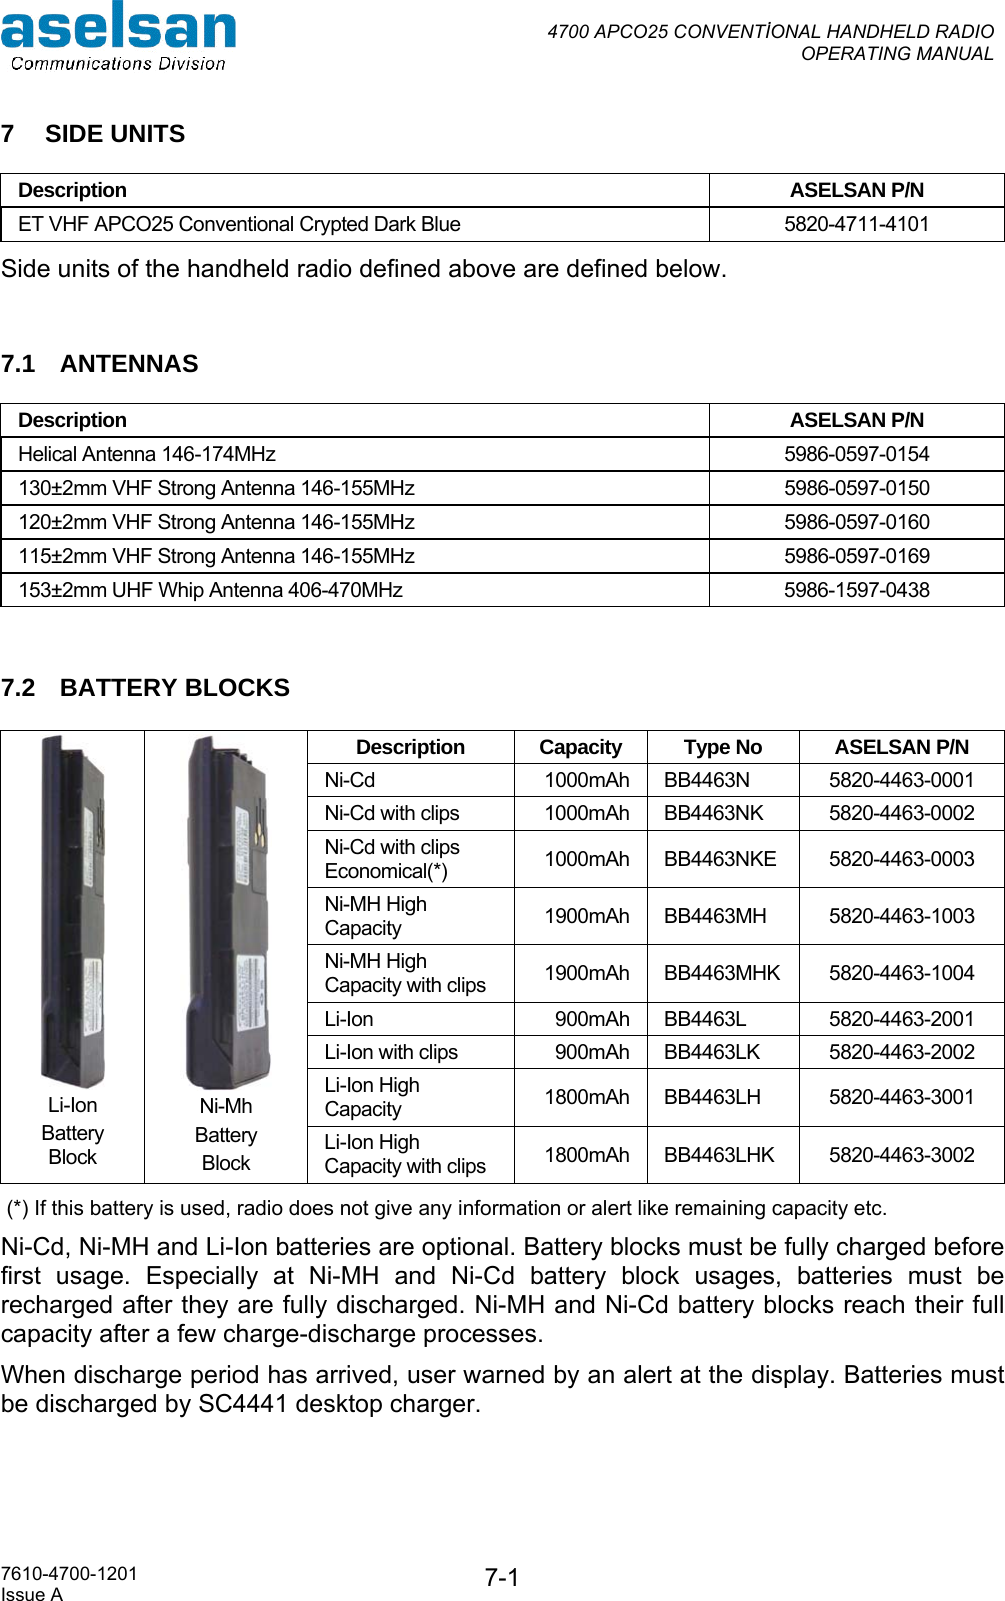  4700 APCO25 CONVENTİONAL HANDHELD RADIO  OPERATING MANUAL   7610-4700-1201 Issue A  7-17 SIDE UNITS Description ASELSAN P/N ET VHF APCO25 Conventional Crypted Dark Blue   5820-4711-4101 Side units of the handheld radio defined above are defined below.  7.1 ANTENNAS Description ASELSAN P/N Helical Antenna 146-174MHz   5986-0597-0154 130±2mm VHF Strong Antenna 146-155MHz  5986-0597-0150 120±2mm VHF Strong Antenna 146-155MHz  5986-0597-0160 115±2mm VHF Strong Antenna 146-155MHz  5986-0597-0169 153±2mm UHF Whip Antenna 406-470MHz  5986-1597-0438  7.2 BATTERY BLOCKS  (*) If this battery is used, radio does not give any information or alert like remaining capacity etc. Ni-Cd, Ni-MH and Li-Ion batteries are optional. Battery blocks must be fully charged before first usage. Especially at Ni-MH and Ni-Cd battery block usages, batteries must be recharged after they are fully discharged. Ni-MH and Ni-Cd battery blocks reach their full capacity after a few charge-discharge processes. When discharge period has arrived, user warned by an alert at the display. Batteries must be discharged by SC4441 desktop charger.  Description  Capacity  Type No  ASELSAN P/N Ni-Cd   1000mAh  BB4463N  5820-4463-0001 Ni-Cd with clips  1000mAh  BB4463NK  5820-4463-0002 Ni-Cd with clips Economical(*)  1000mAh BB4463NKE  5820-4463-0003 Ni-MH High Capacity  1900mAh BB4463MH  5820-4463-1003 Ni-MH High Capacity with clips  1900mAh BB4463MHK  5820-4463-1004 Li-Ion   900mAh  BB4463L  5820-4463-2001 Li-Ion with clips   900mAh  BB4463LK  5820-4463-2002 Li-Ion High Capacity  1800mAh BB4463LH  5820-4463-3001  Li-Ion Battery Block  Ni-Mh Battery  Block Li-Ion High Capacity with clips   1800mAh BB4463LHK  5820-4463-3002 